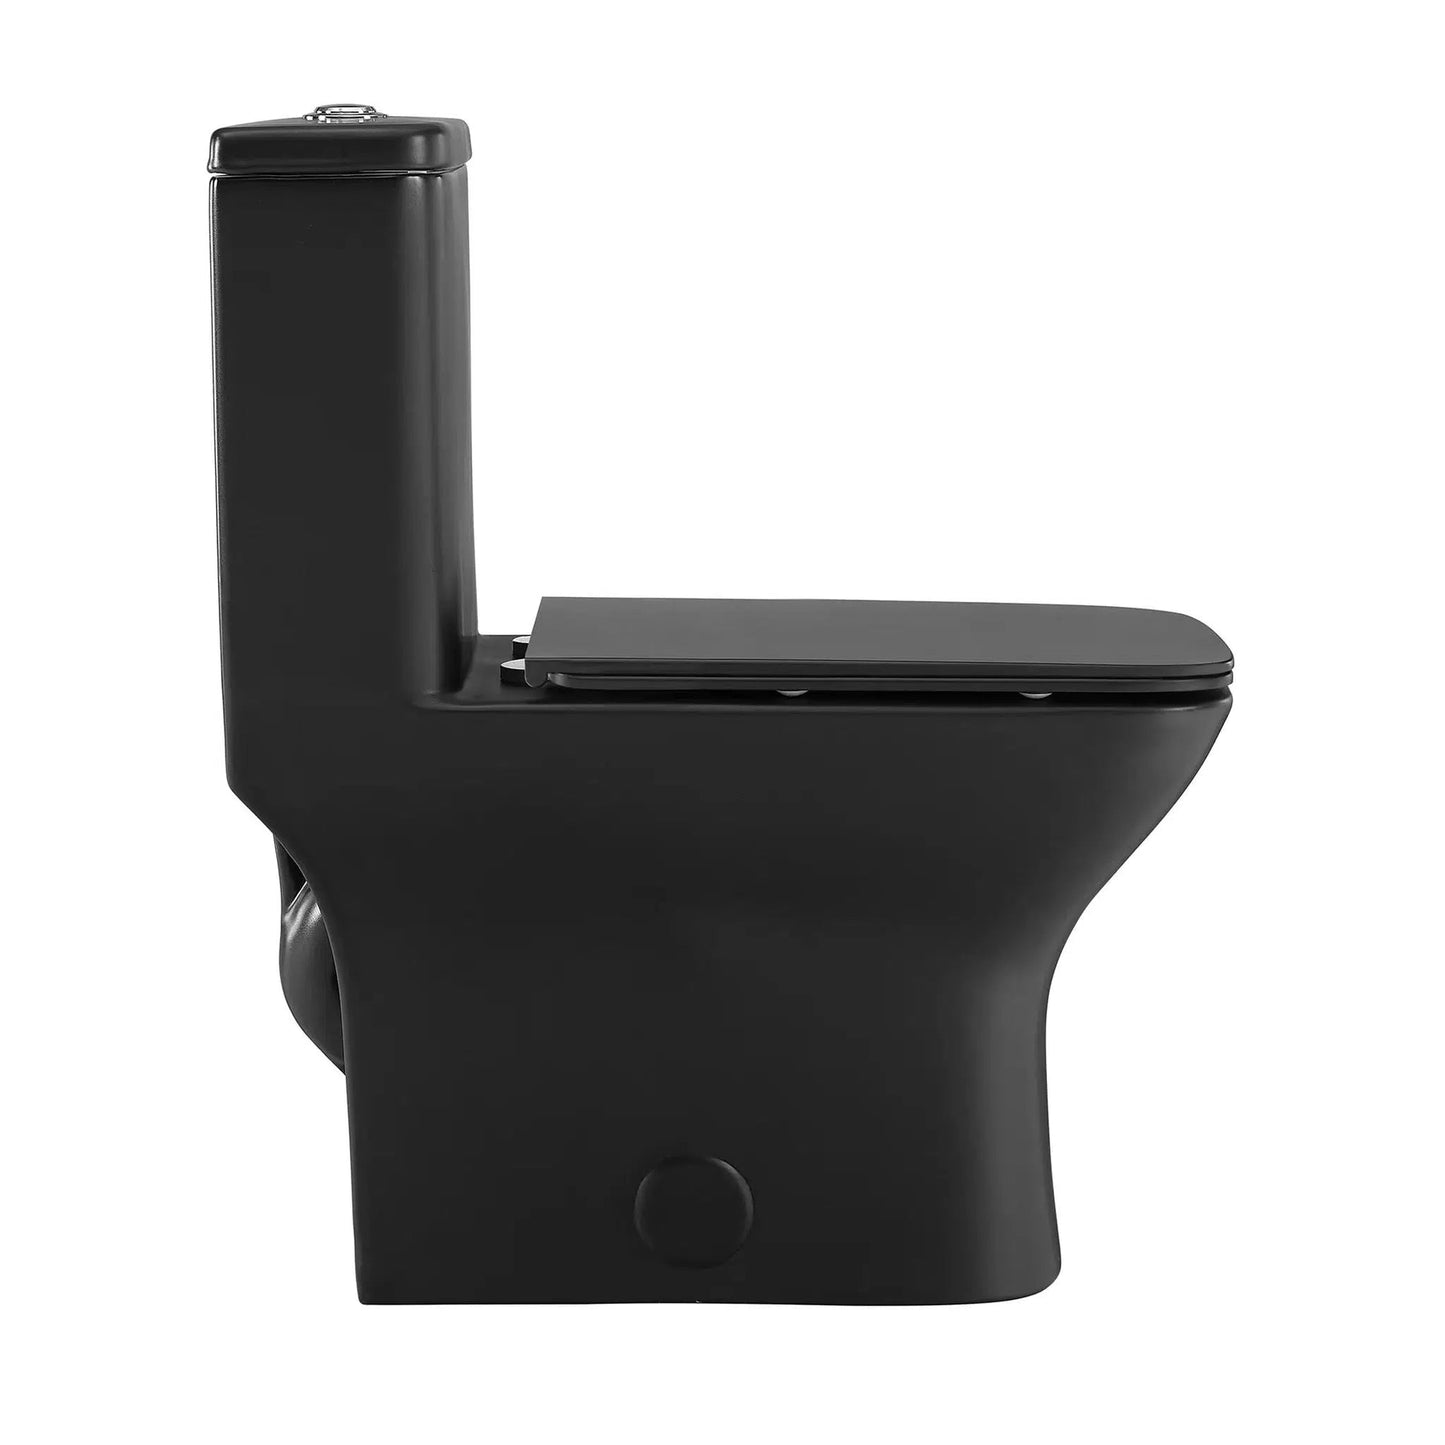 Swiss Madison Carré 15" x 30" One-Piece Matte Black Elongated Square Floor-Mounted Toilet With 1.1/1.6 GPF